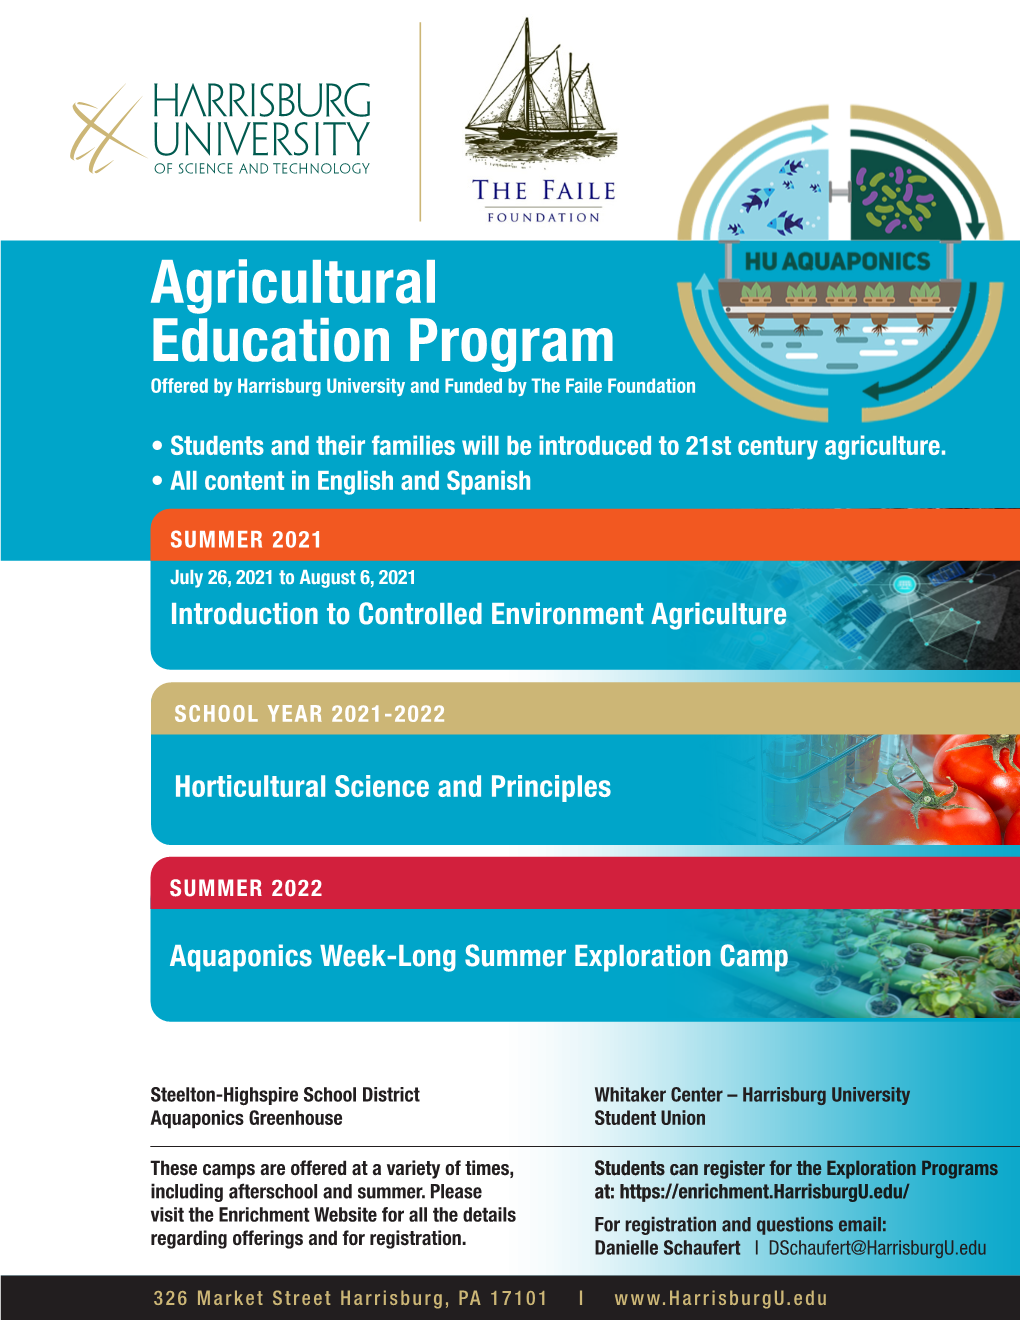 Agricultural Education Program Offered by Harrisburg University and Funded by the Faile Foundation